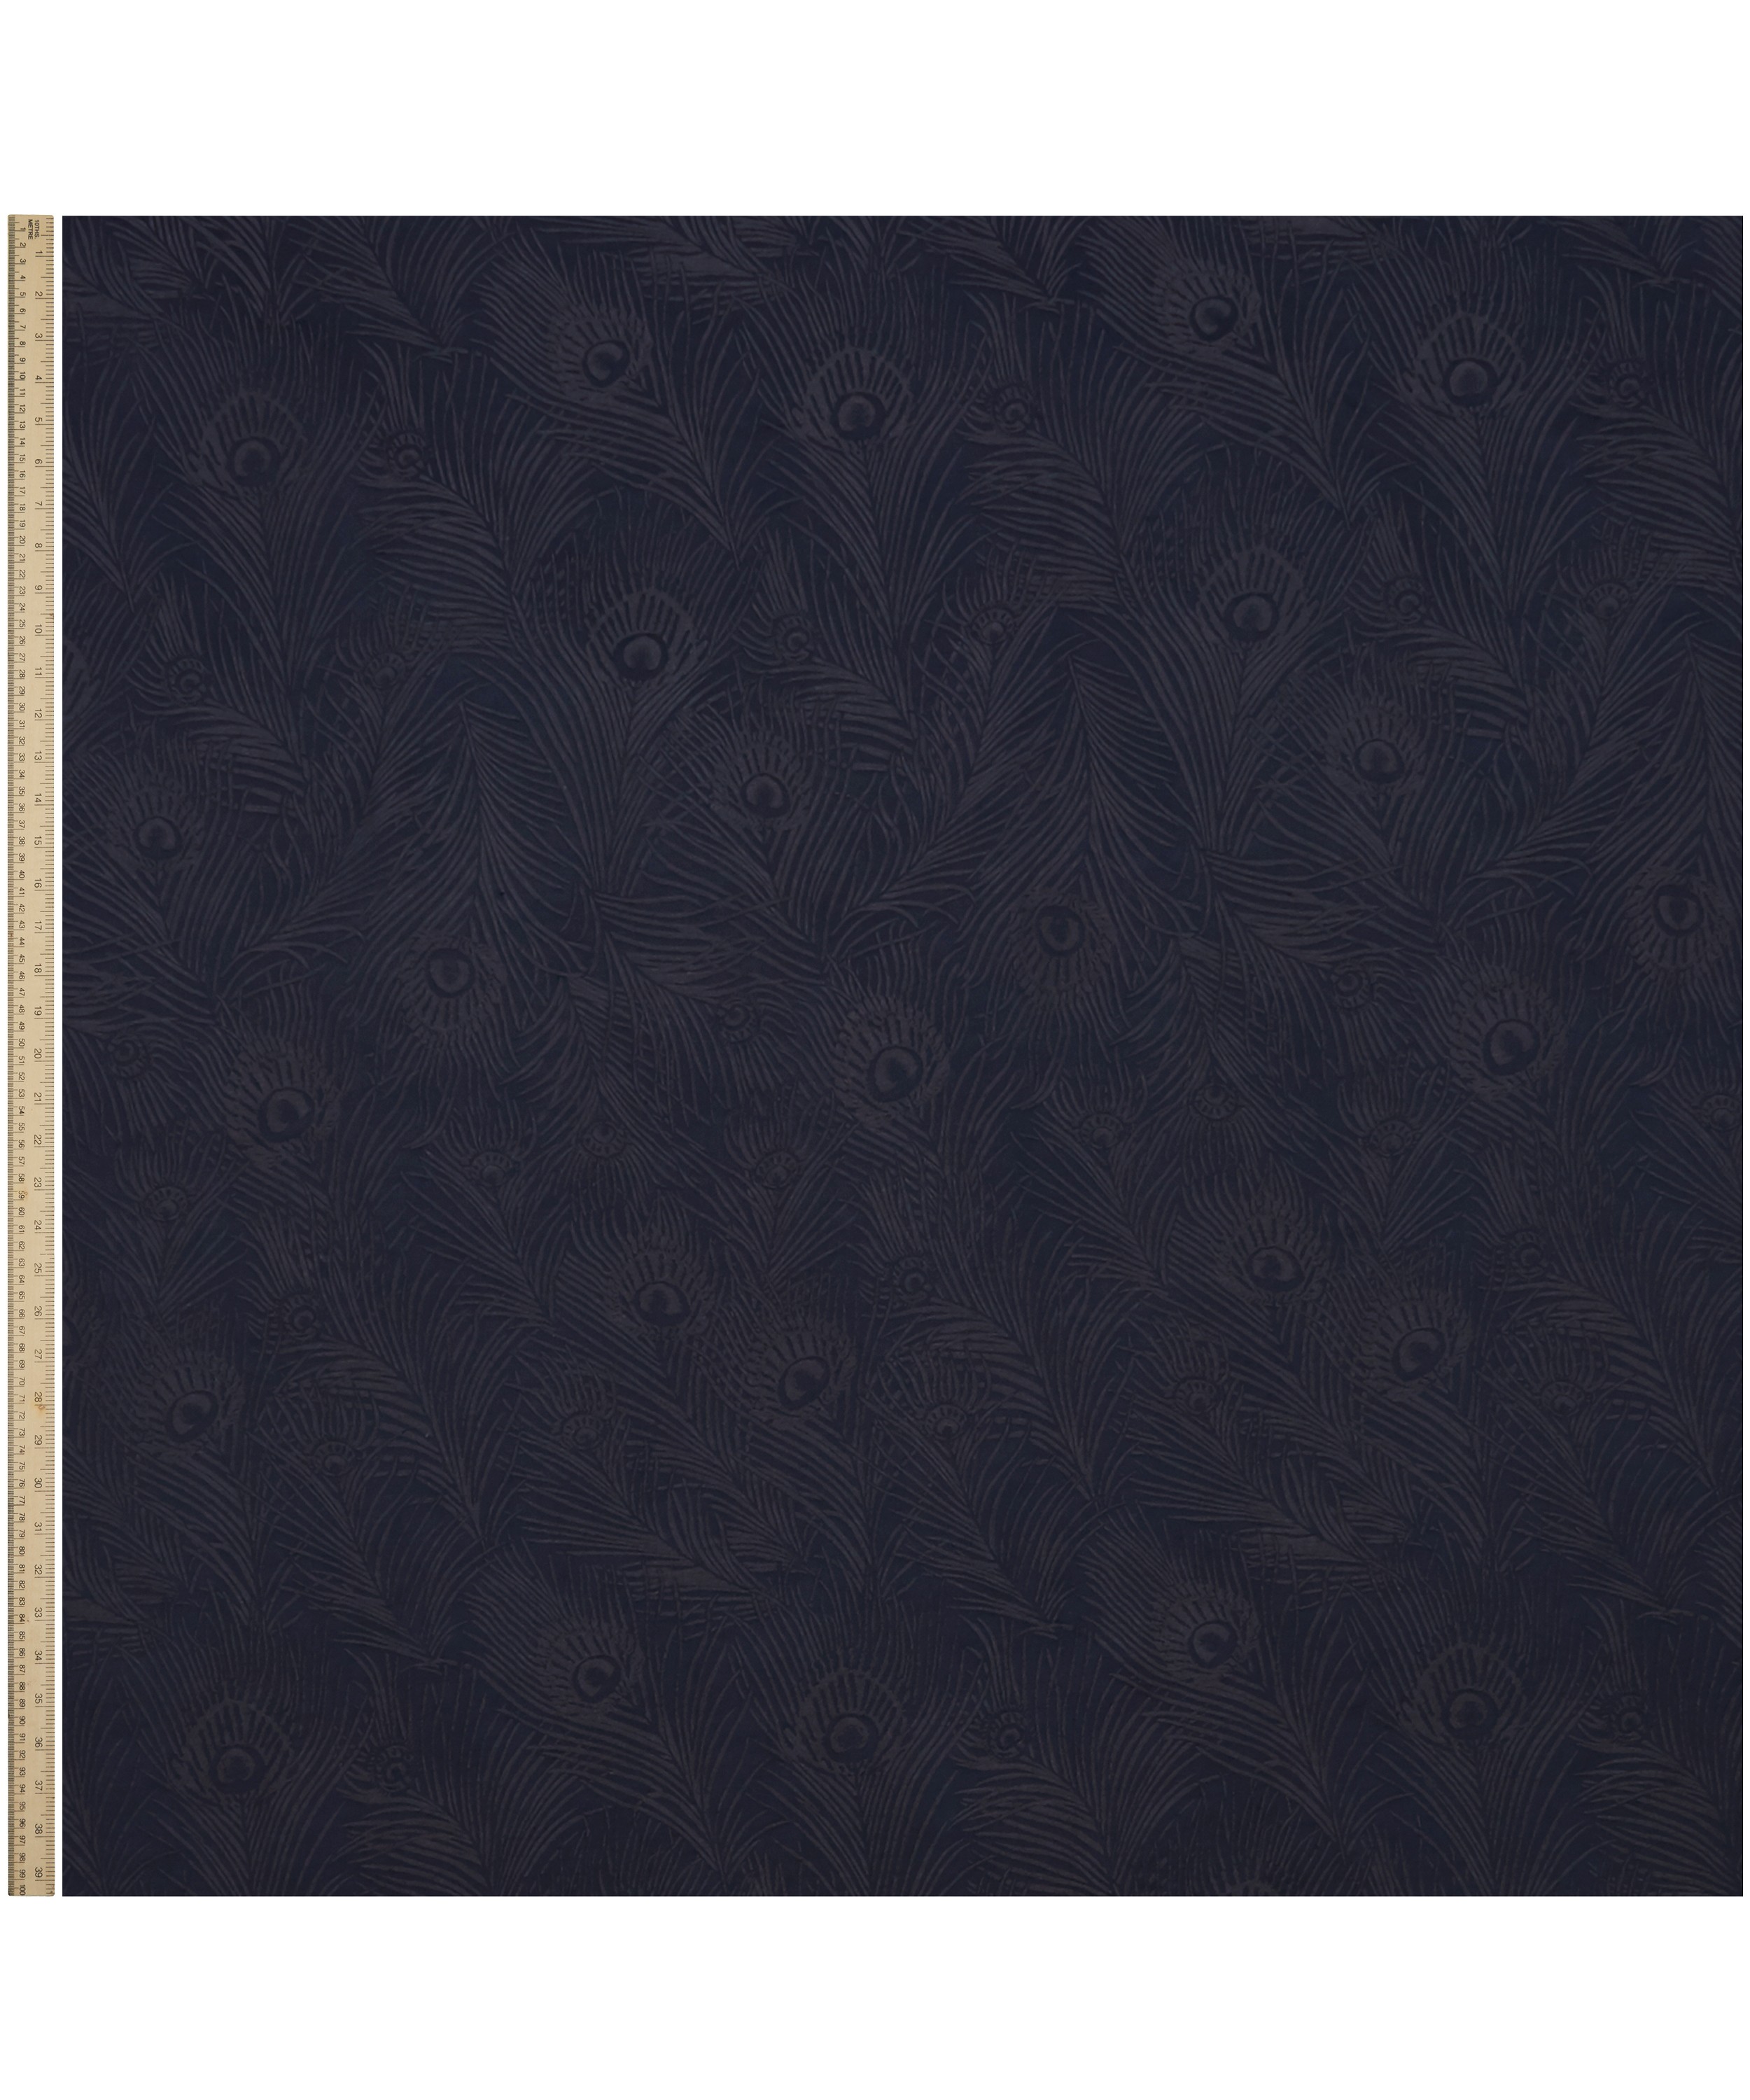 Liberty Interiors - Hera Plume Dyed Jacquard in Ink image number 1